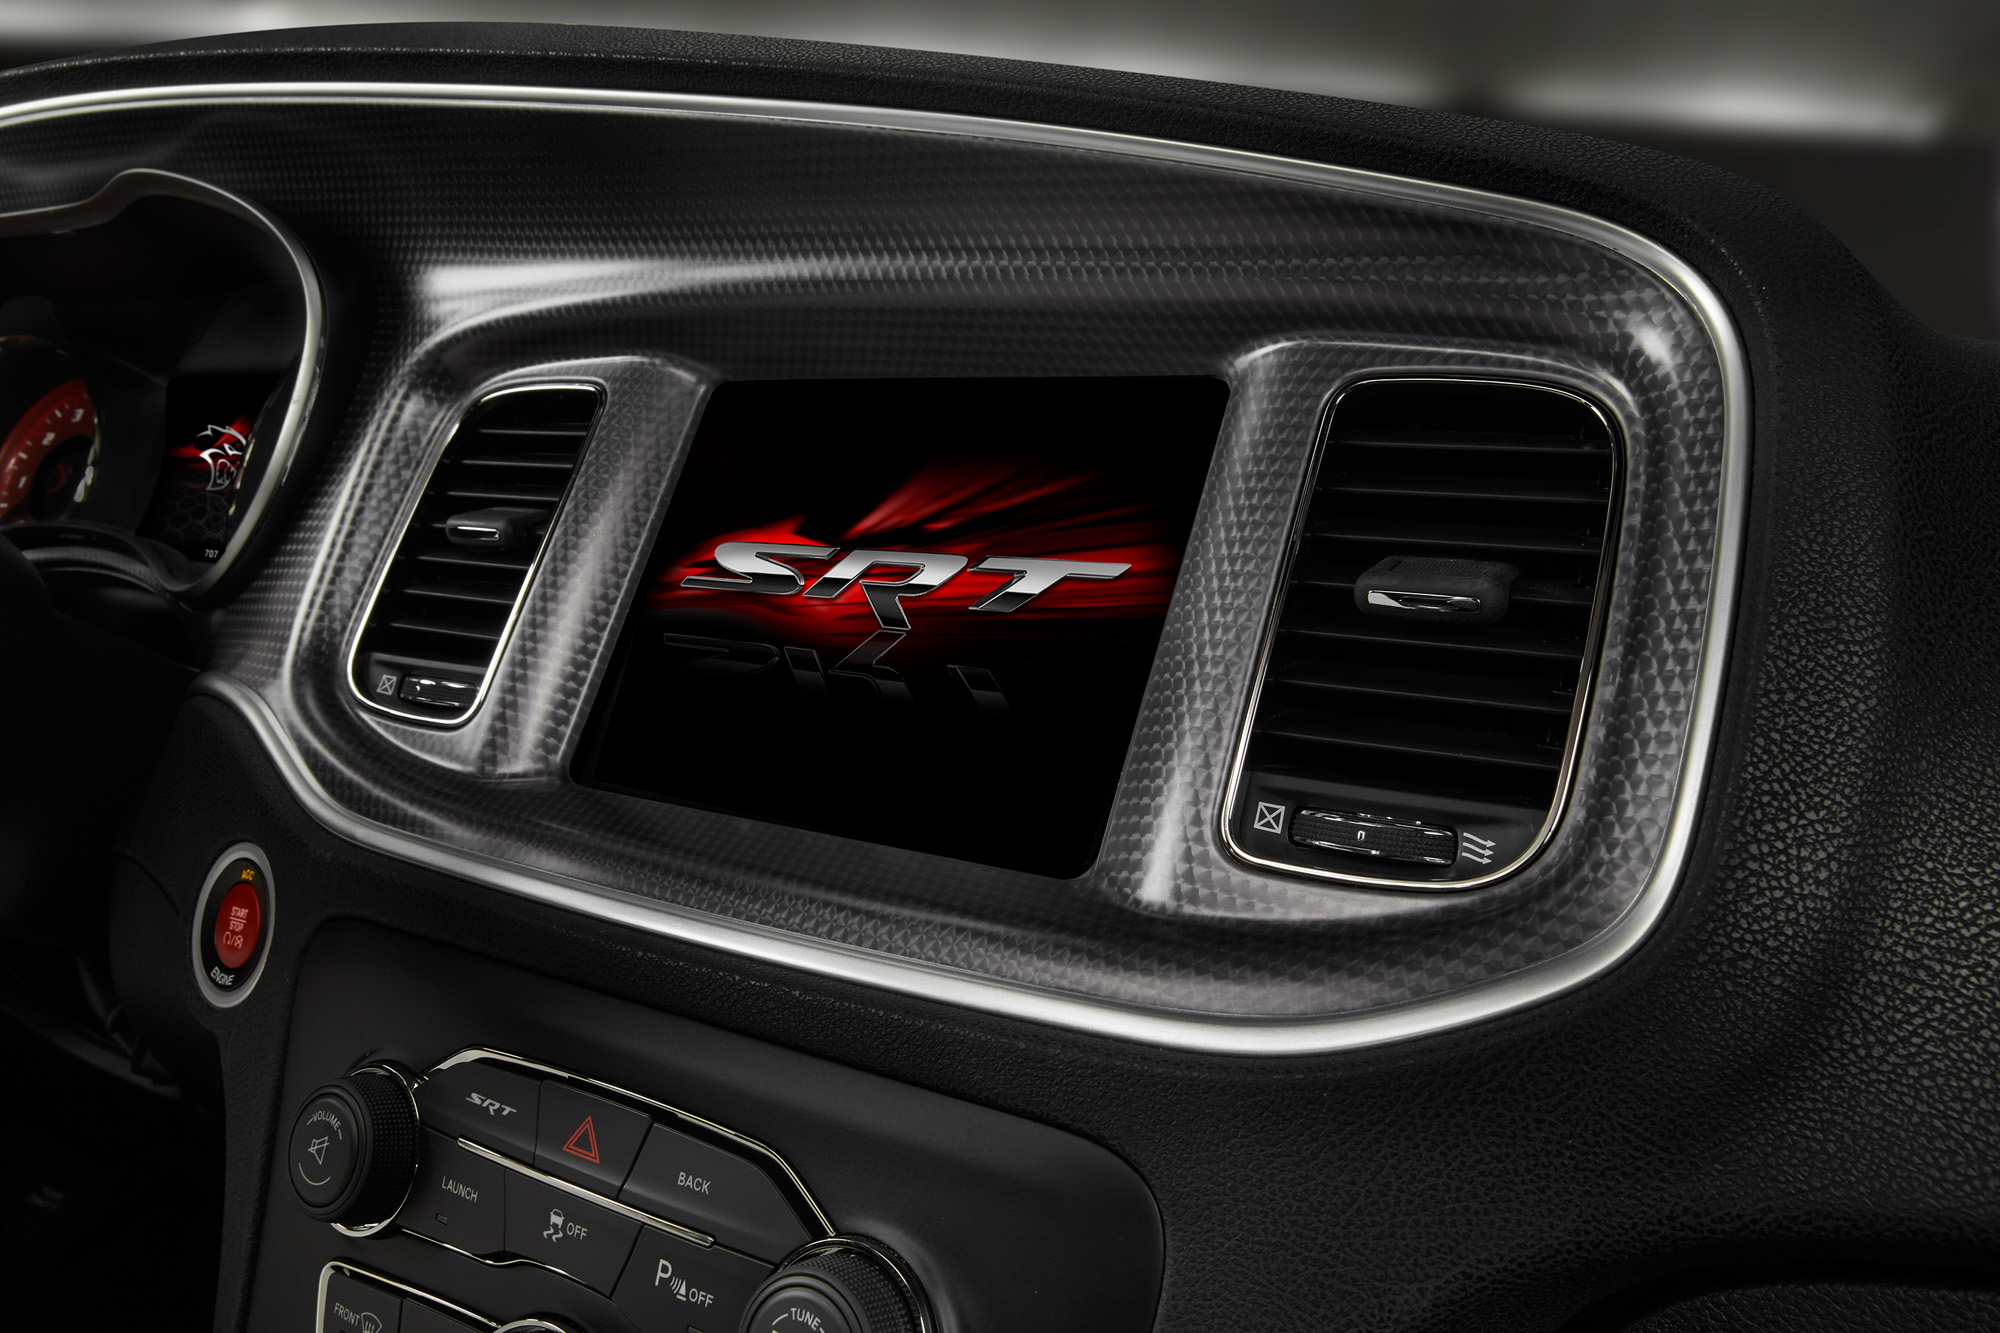 2015 Dodge Charger SRT Hellcat - 8.4 inch Uconnect touch screen